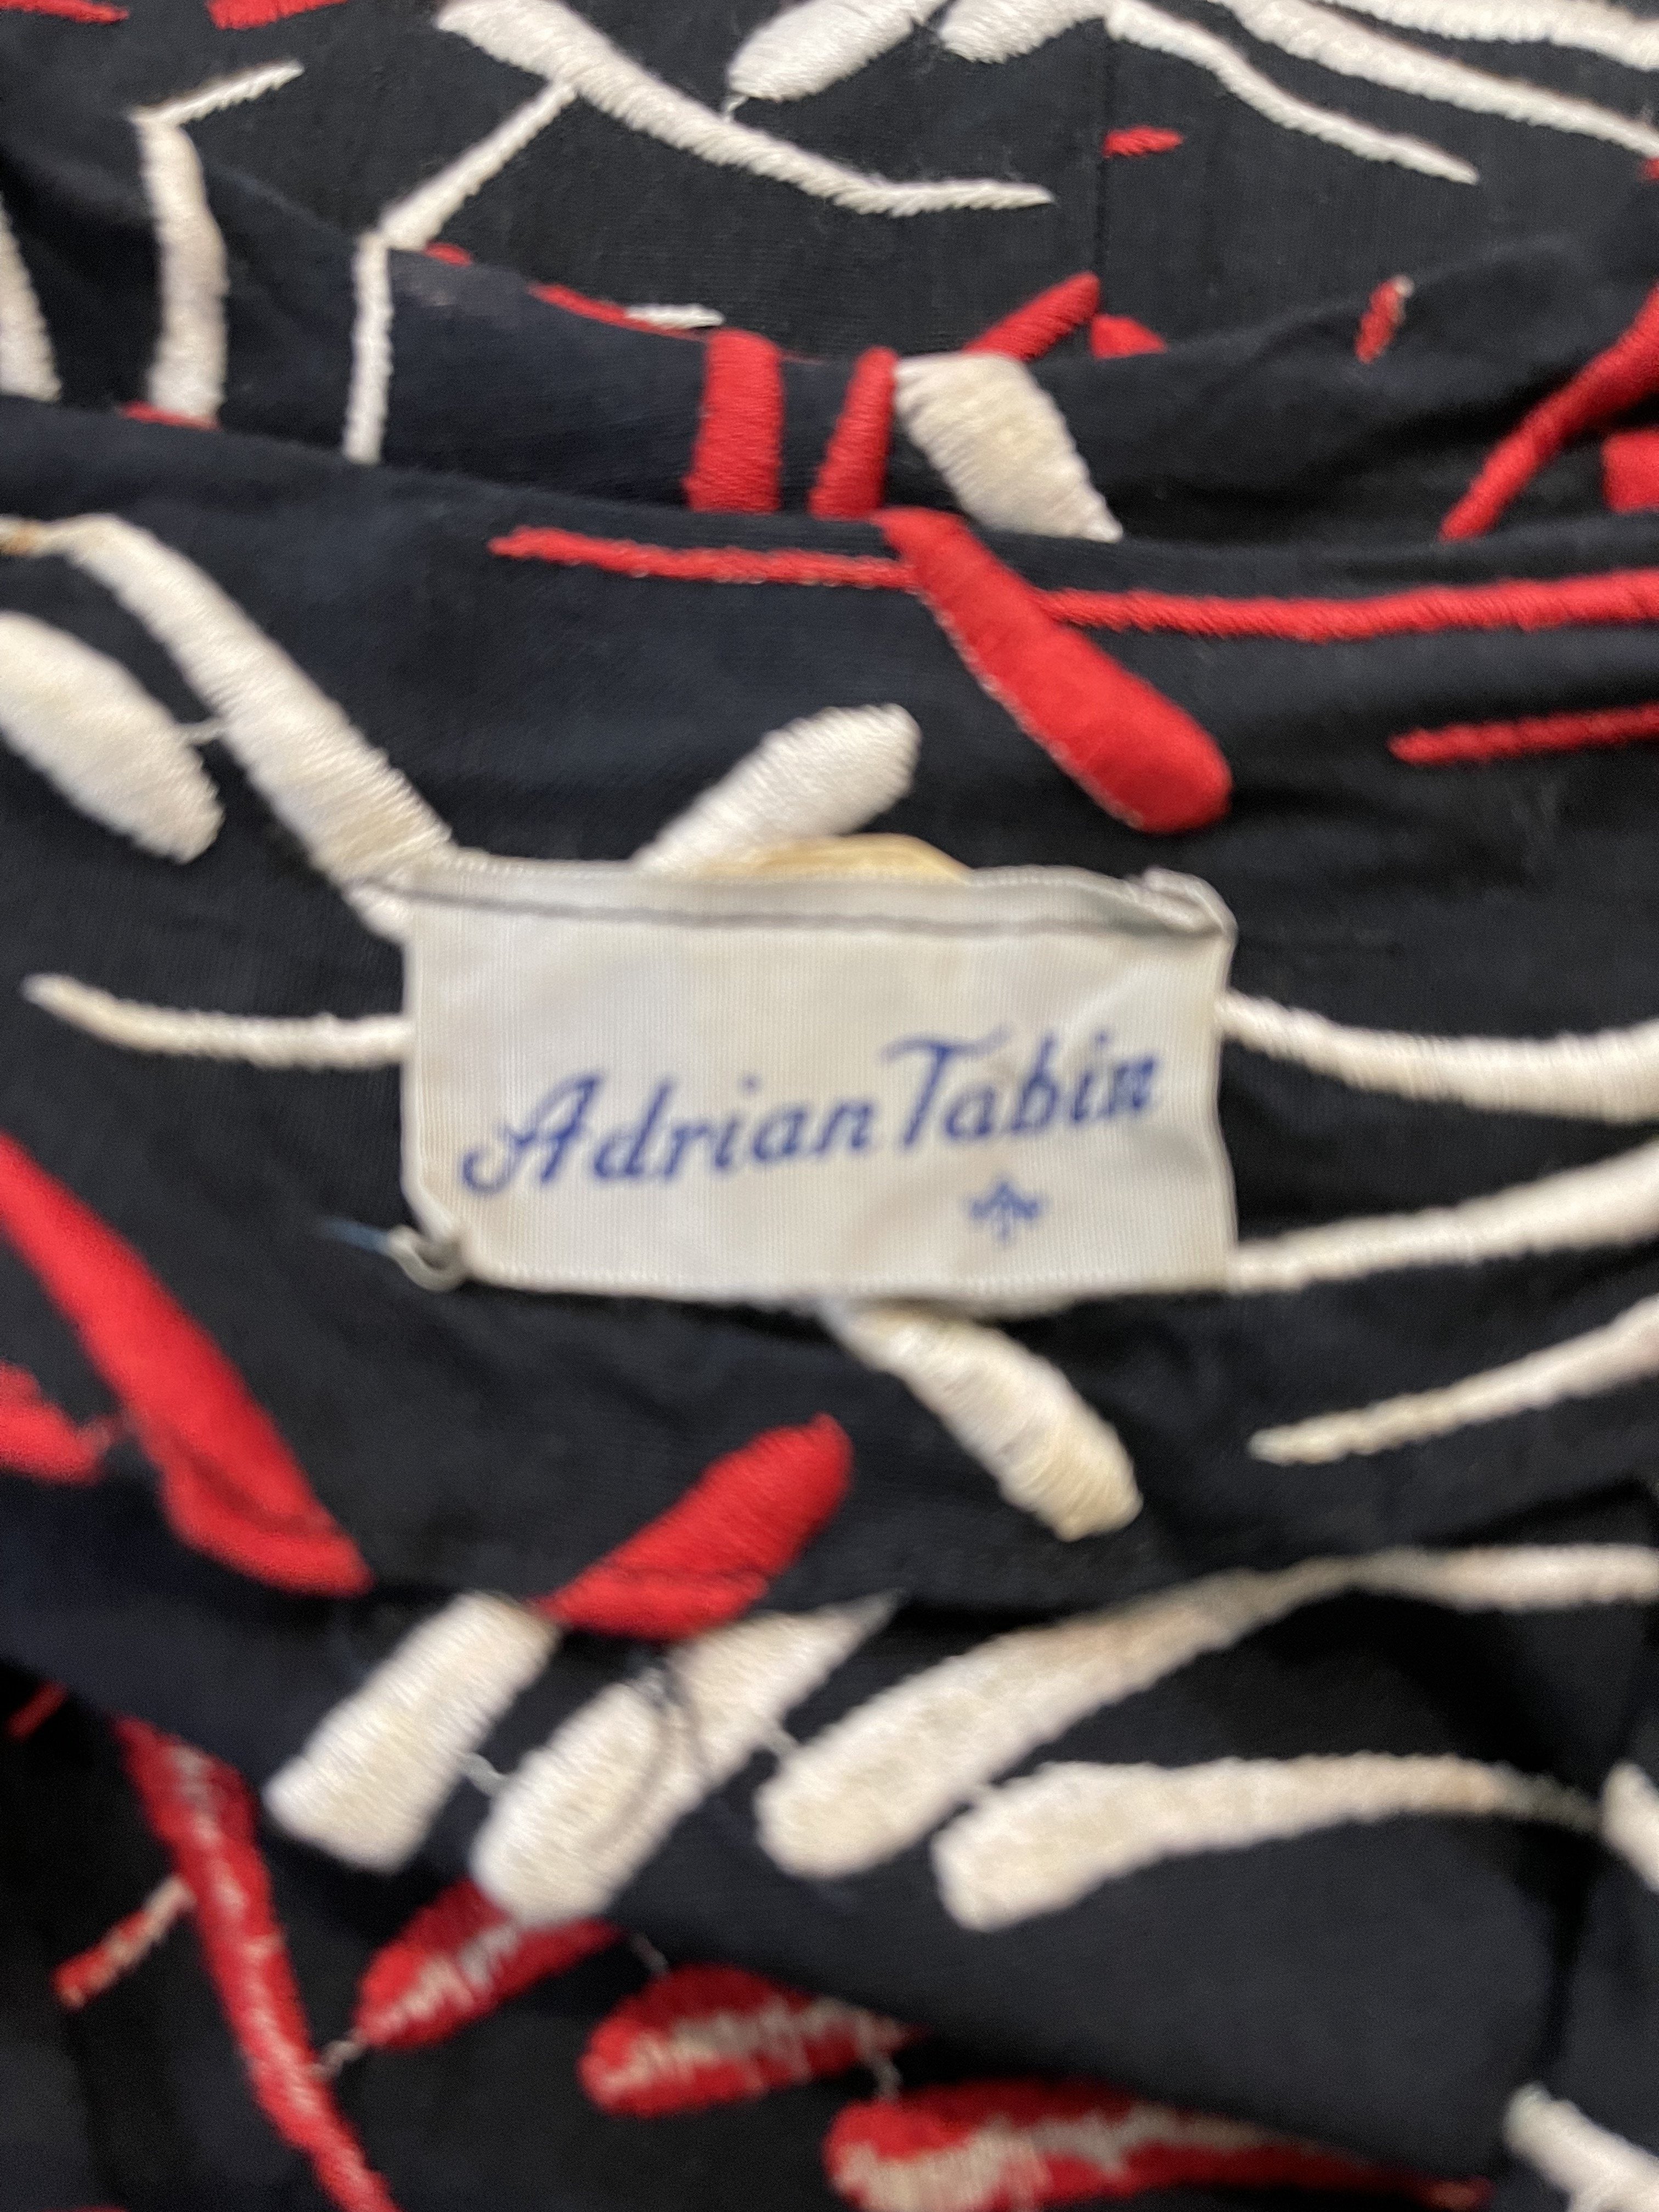 Adrian Tabin 50s Dark Blue Linen Dress w/Red and White Embroidery